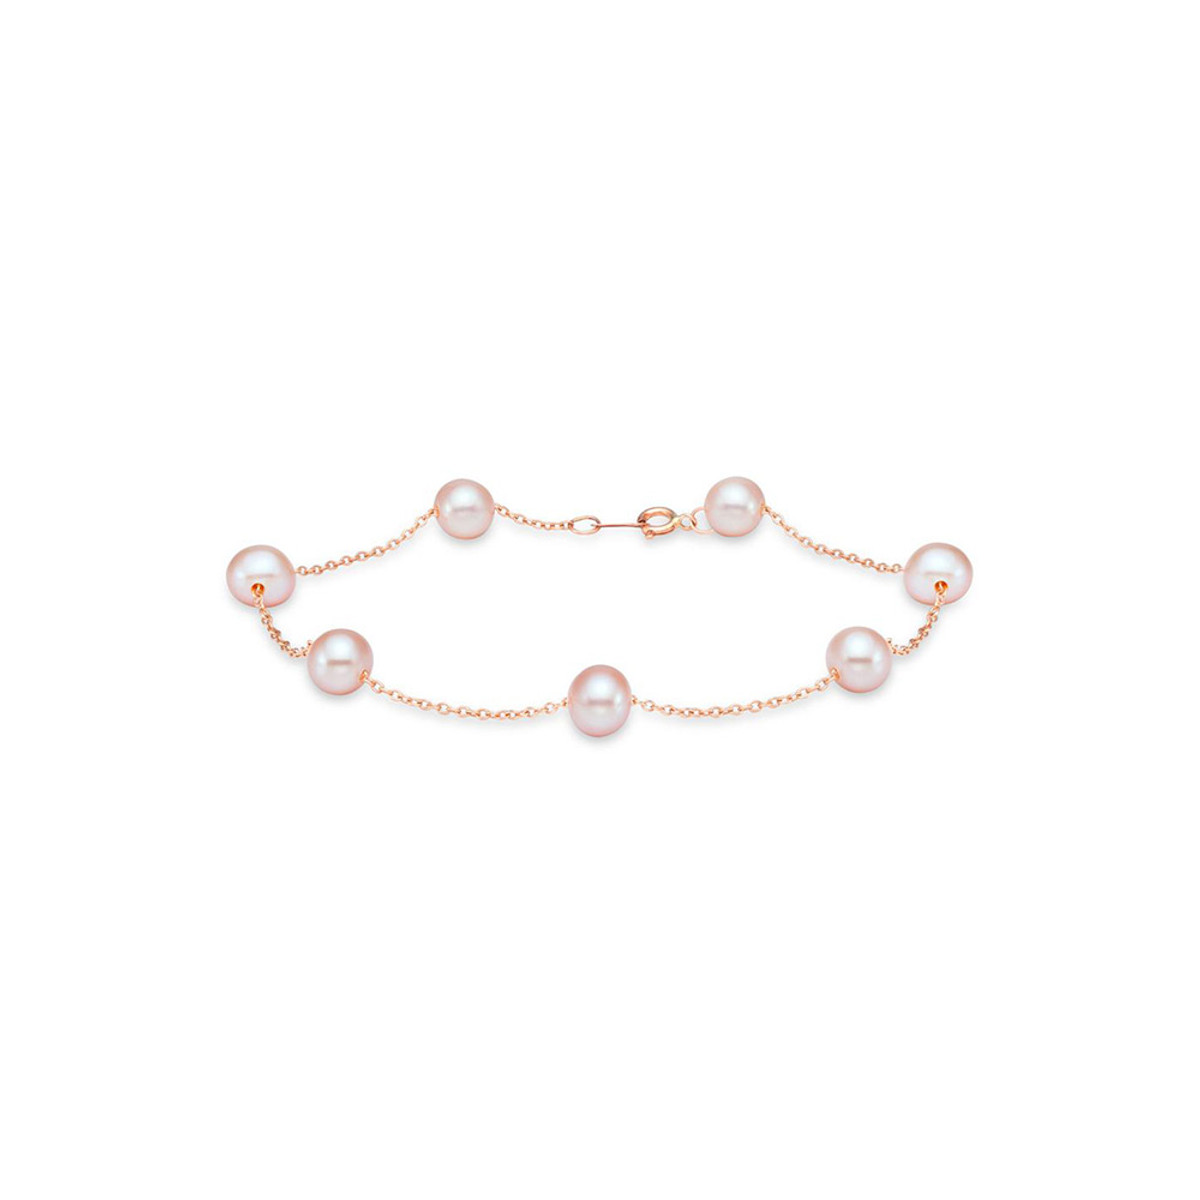 Hyde Park Collection 14K Rose Gold Tin Cup Pearl Bracelet-56117 Product Image